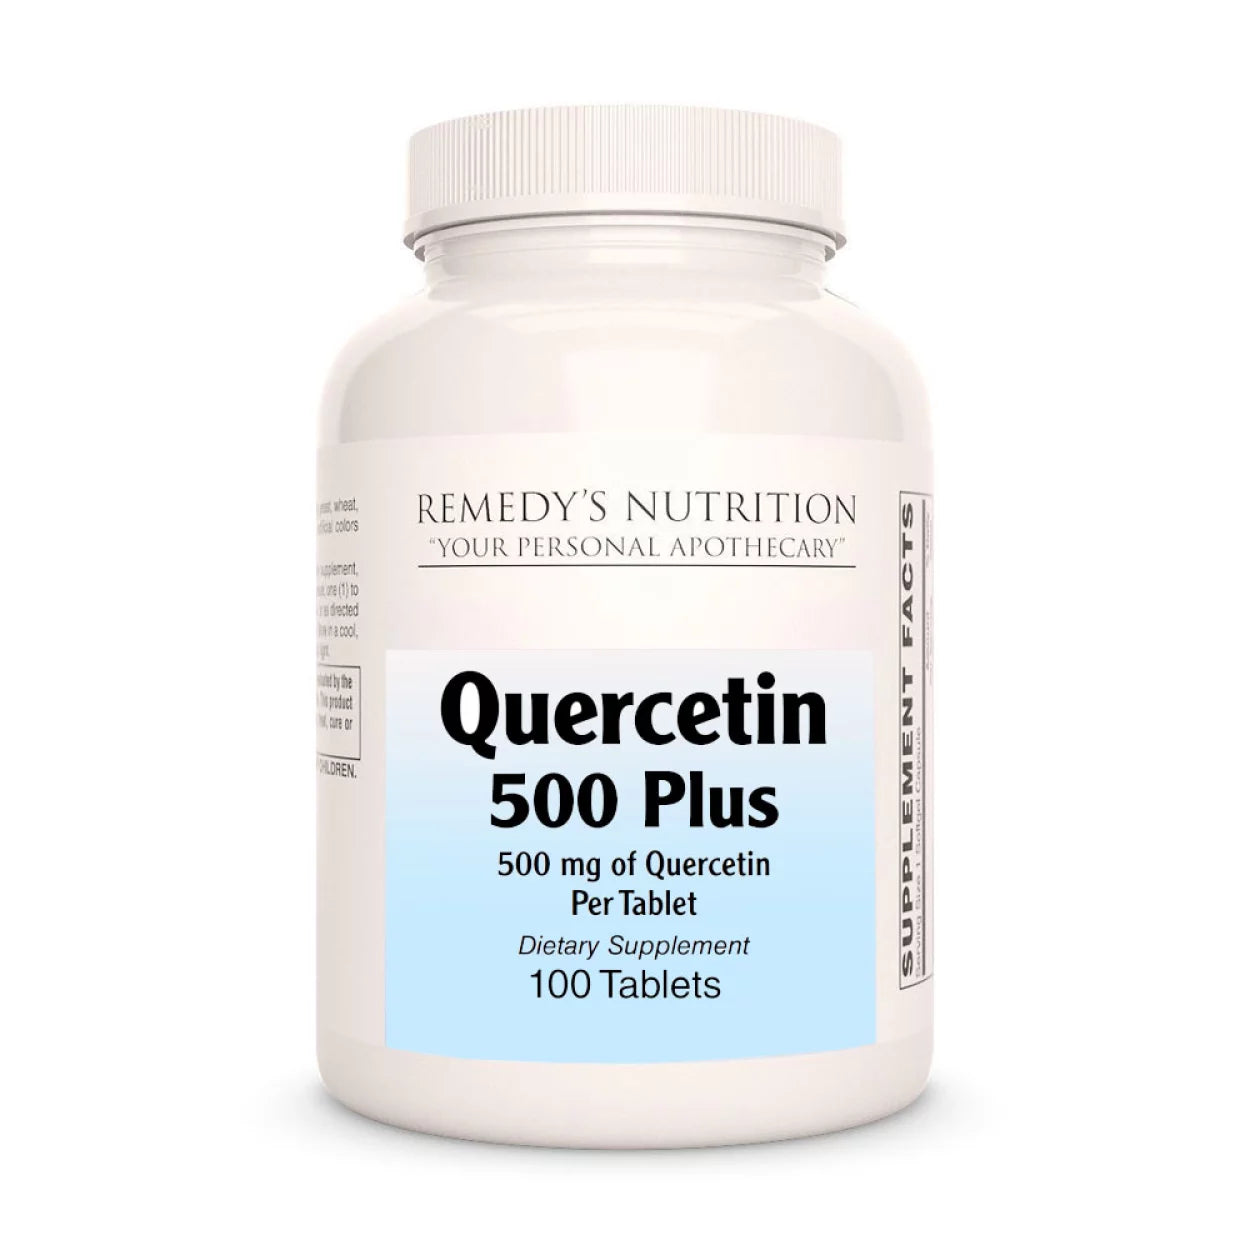 Image of Remedy's Nutrition® Quercetin Tablets Dietary Supplement front bottle. Pure, No Fillers.  100 Tablets